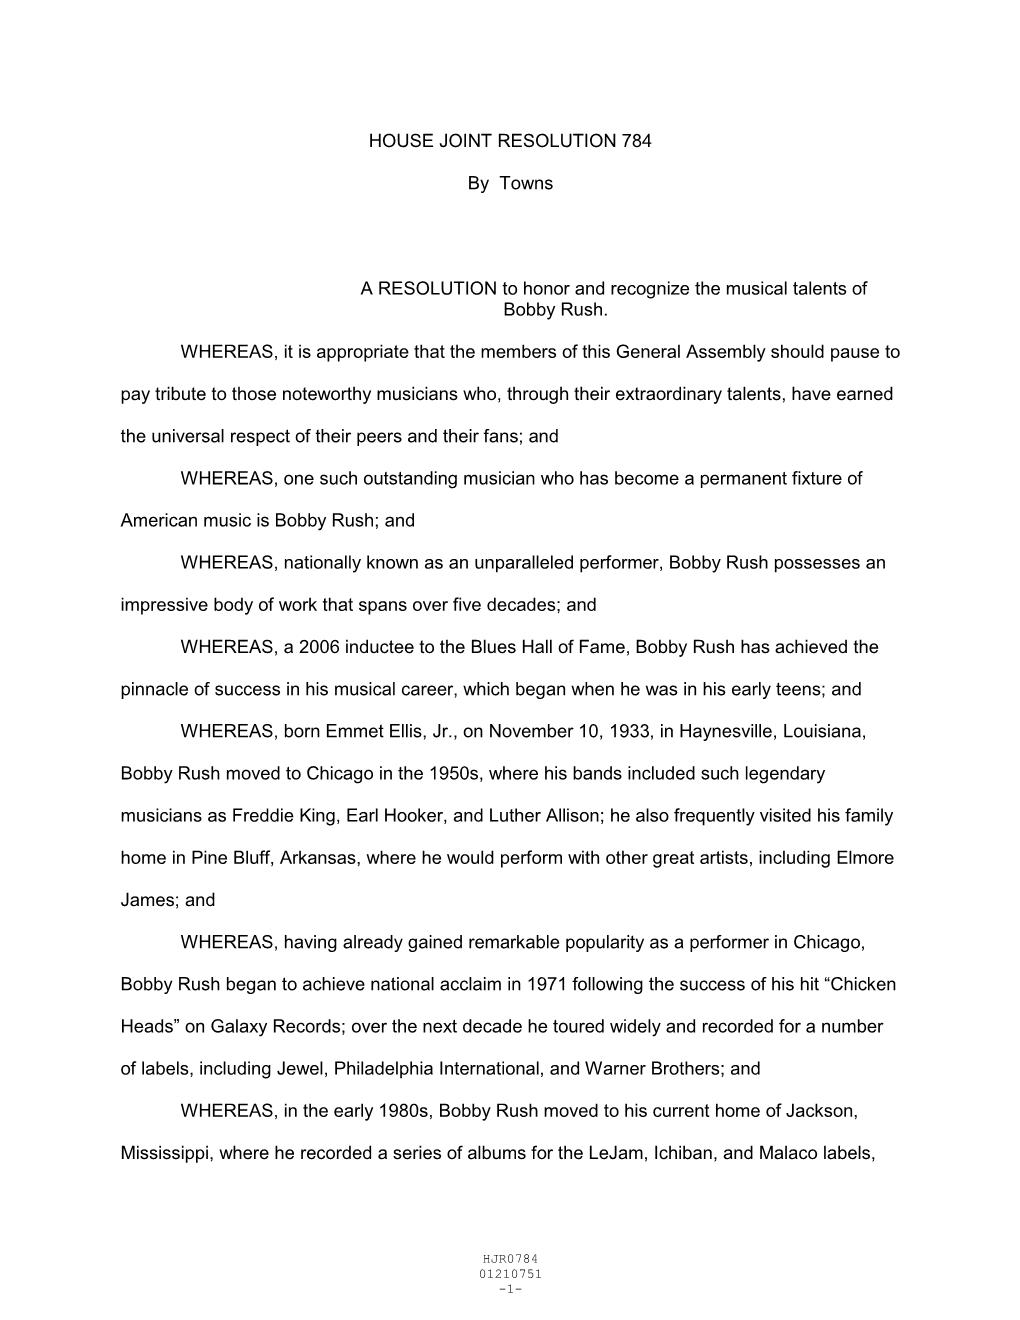 HOUSE JOINT RESOLUTION 784 by Towns a RESOLUTION to Honor and Recognize the Musical Talents of Bobby Rush. WHEREAS, It Is Appr